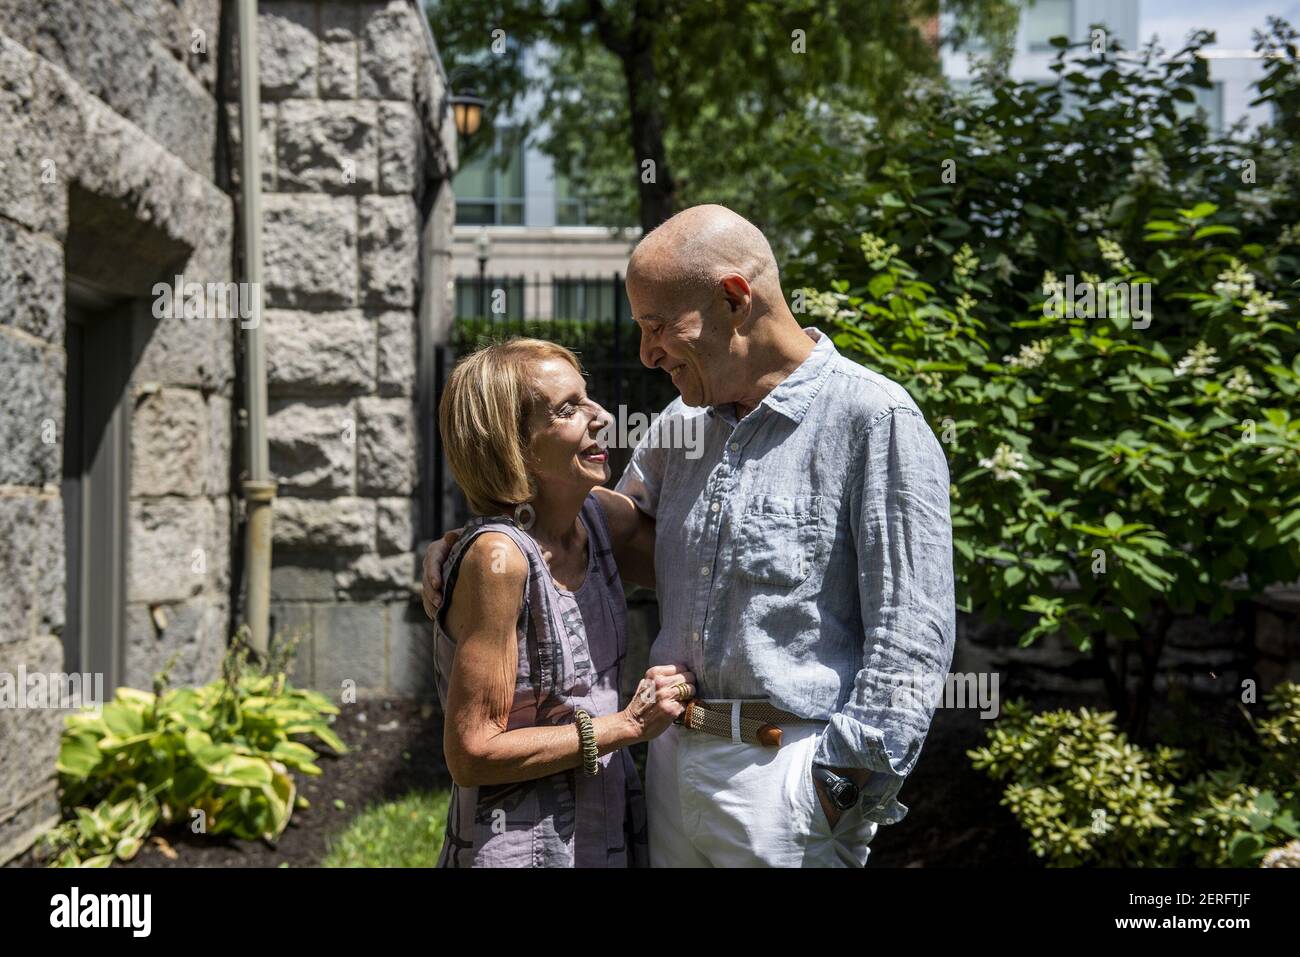 Melinda Watman, left, and husband Kenneth Watman enjoy each others company outside of their home on Saturday, July 28, 2018, in Boston, Mass image